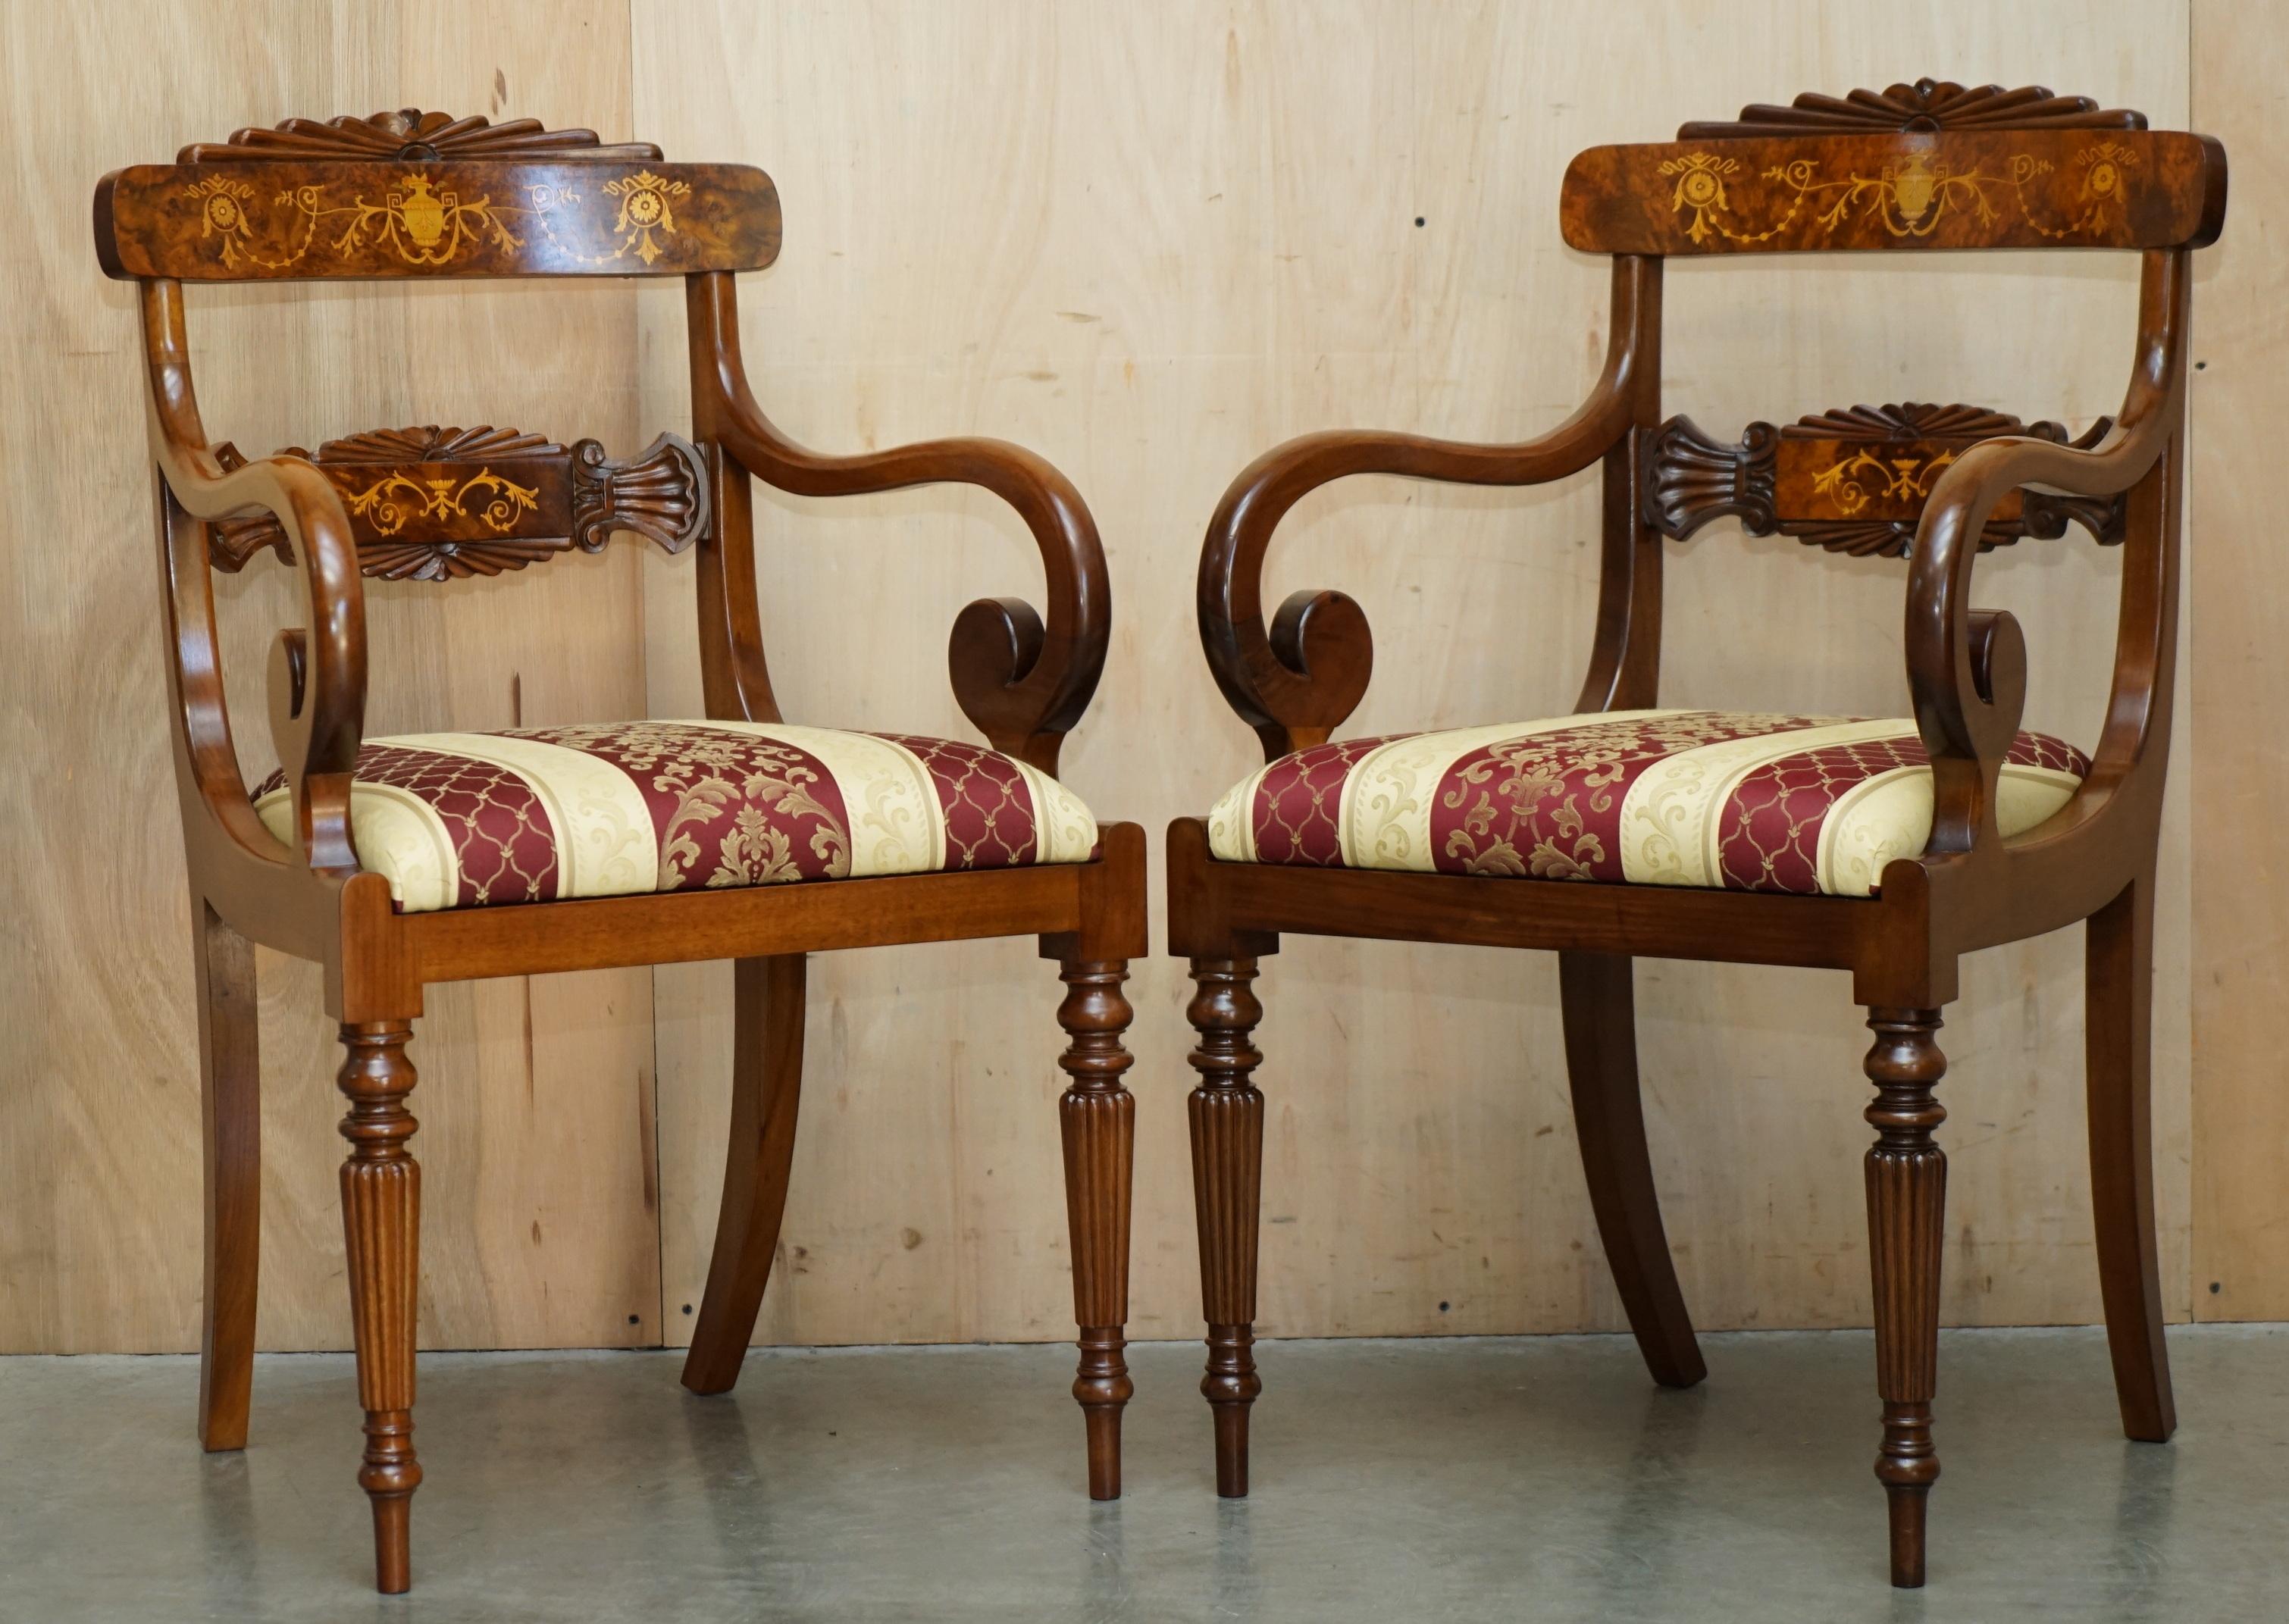 EXQUISITE TWO PEDESTAL BURR WALNUT EXTENDING DiNING TABLE & 10 CHAIRS SUITE For Sale 6